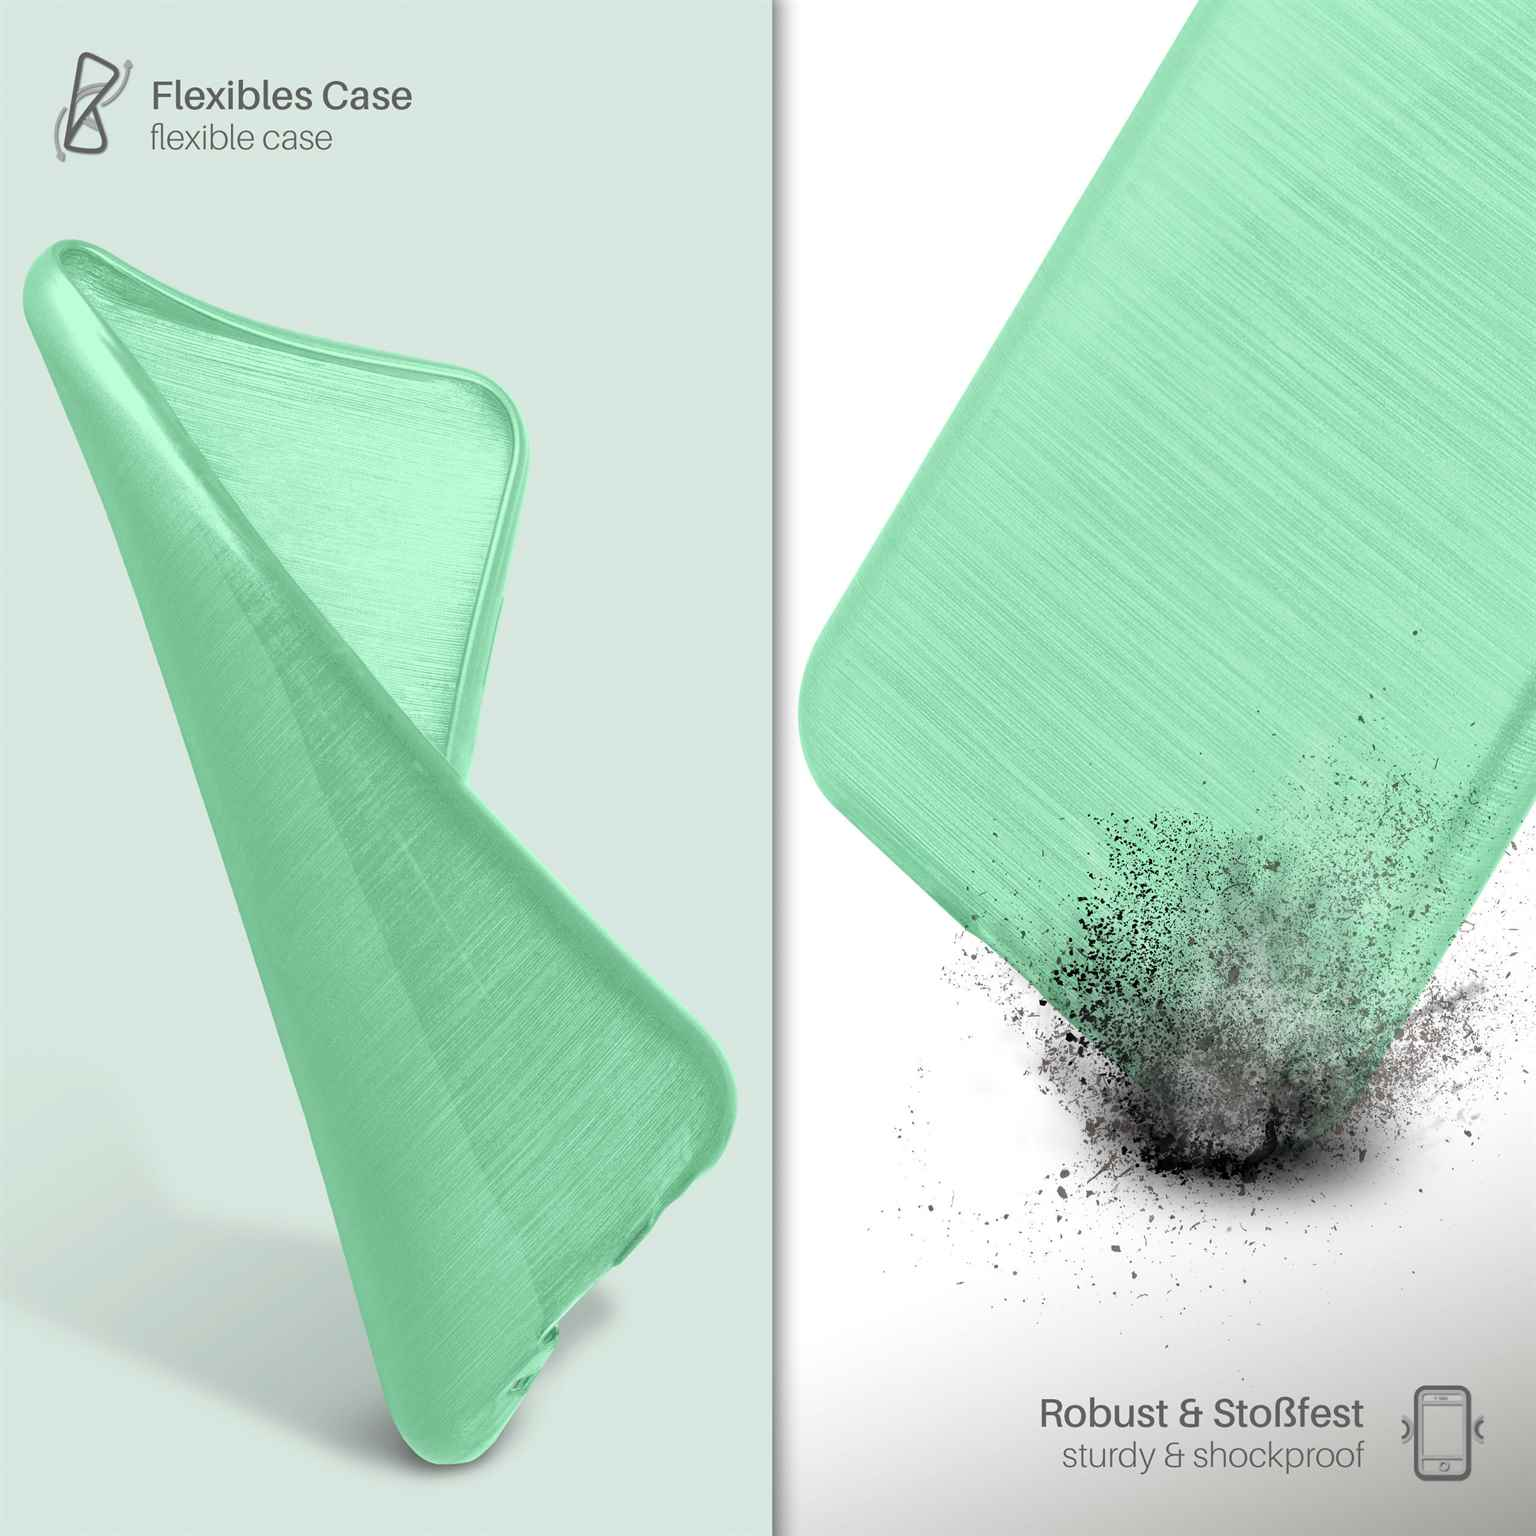 MOEX Brushed Case, Backcover, Galaxy Samsung, S8, Mint-Green